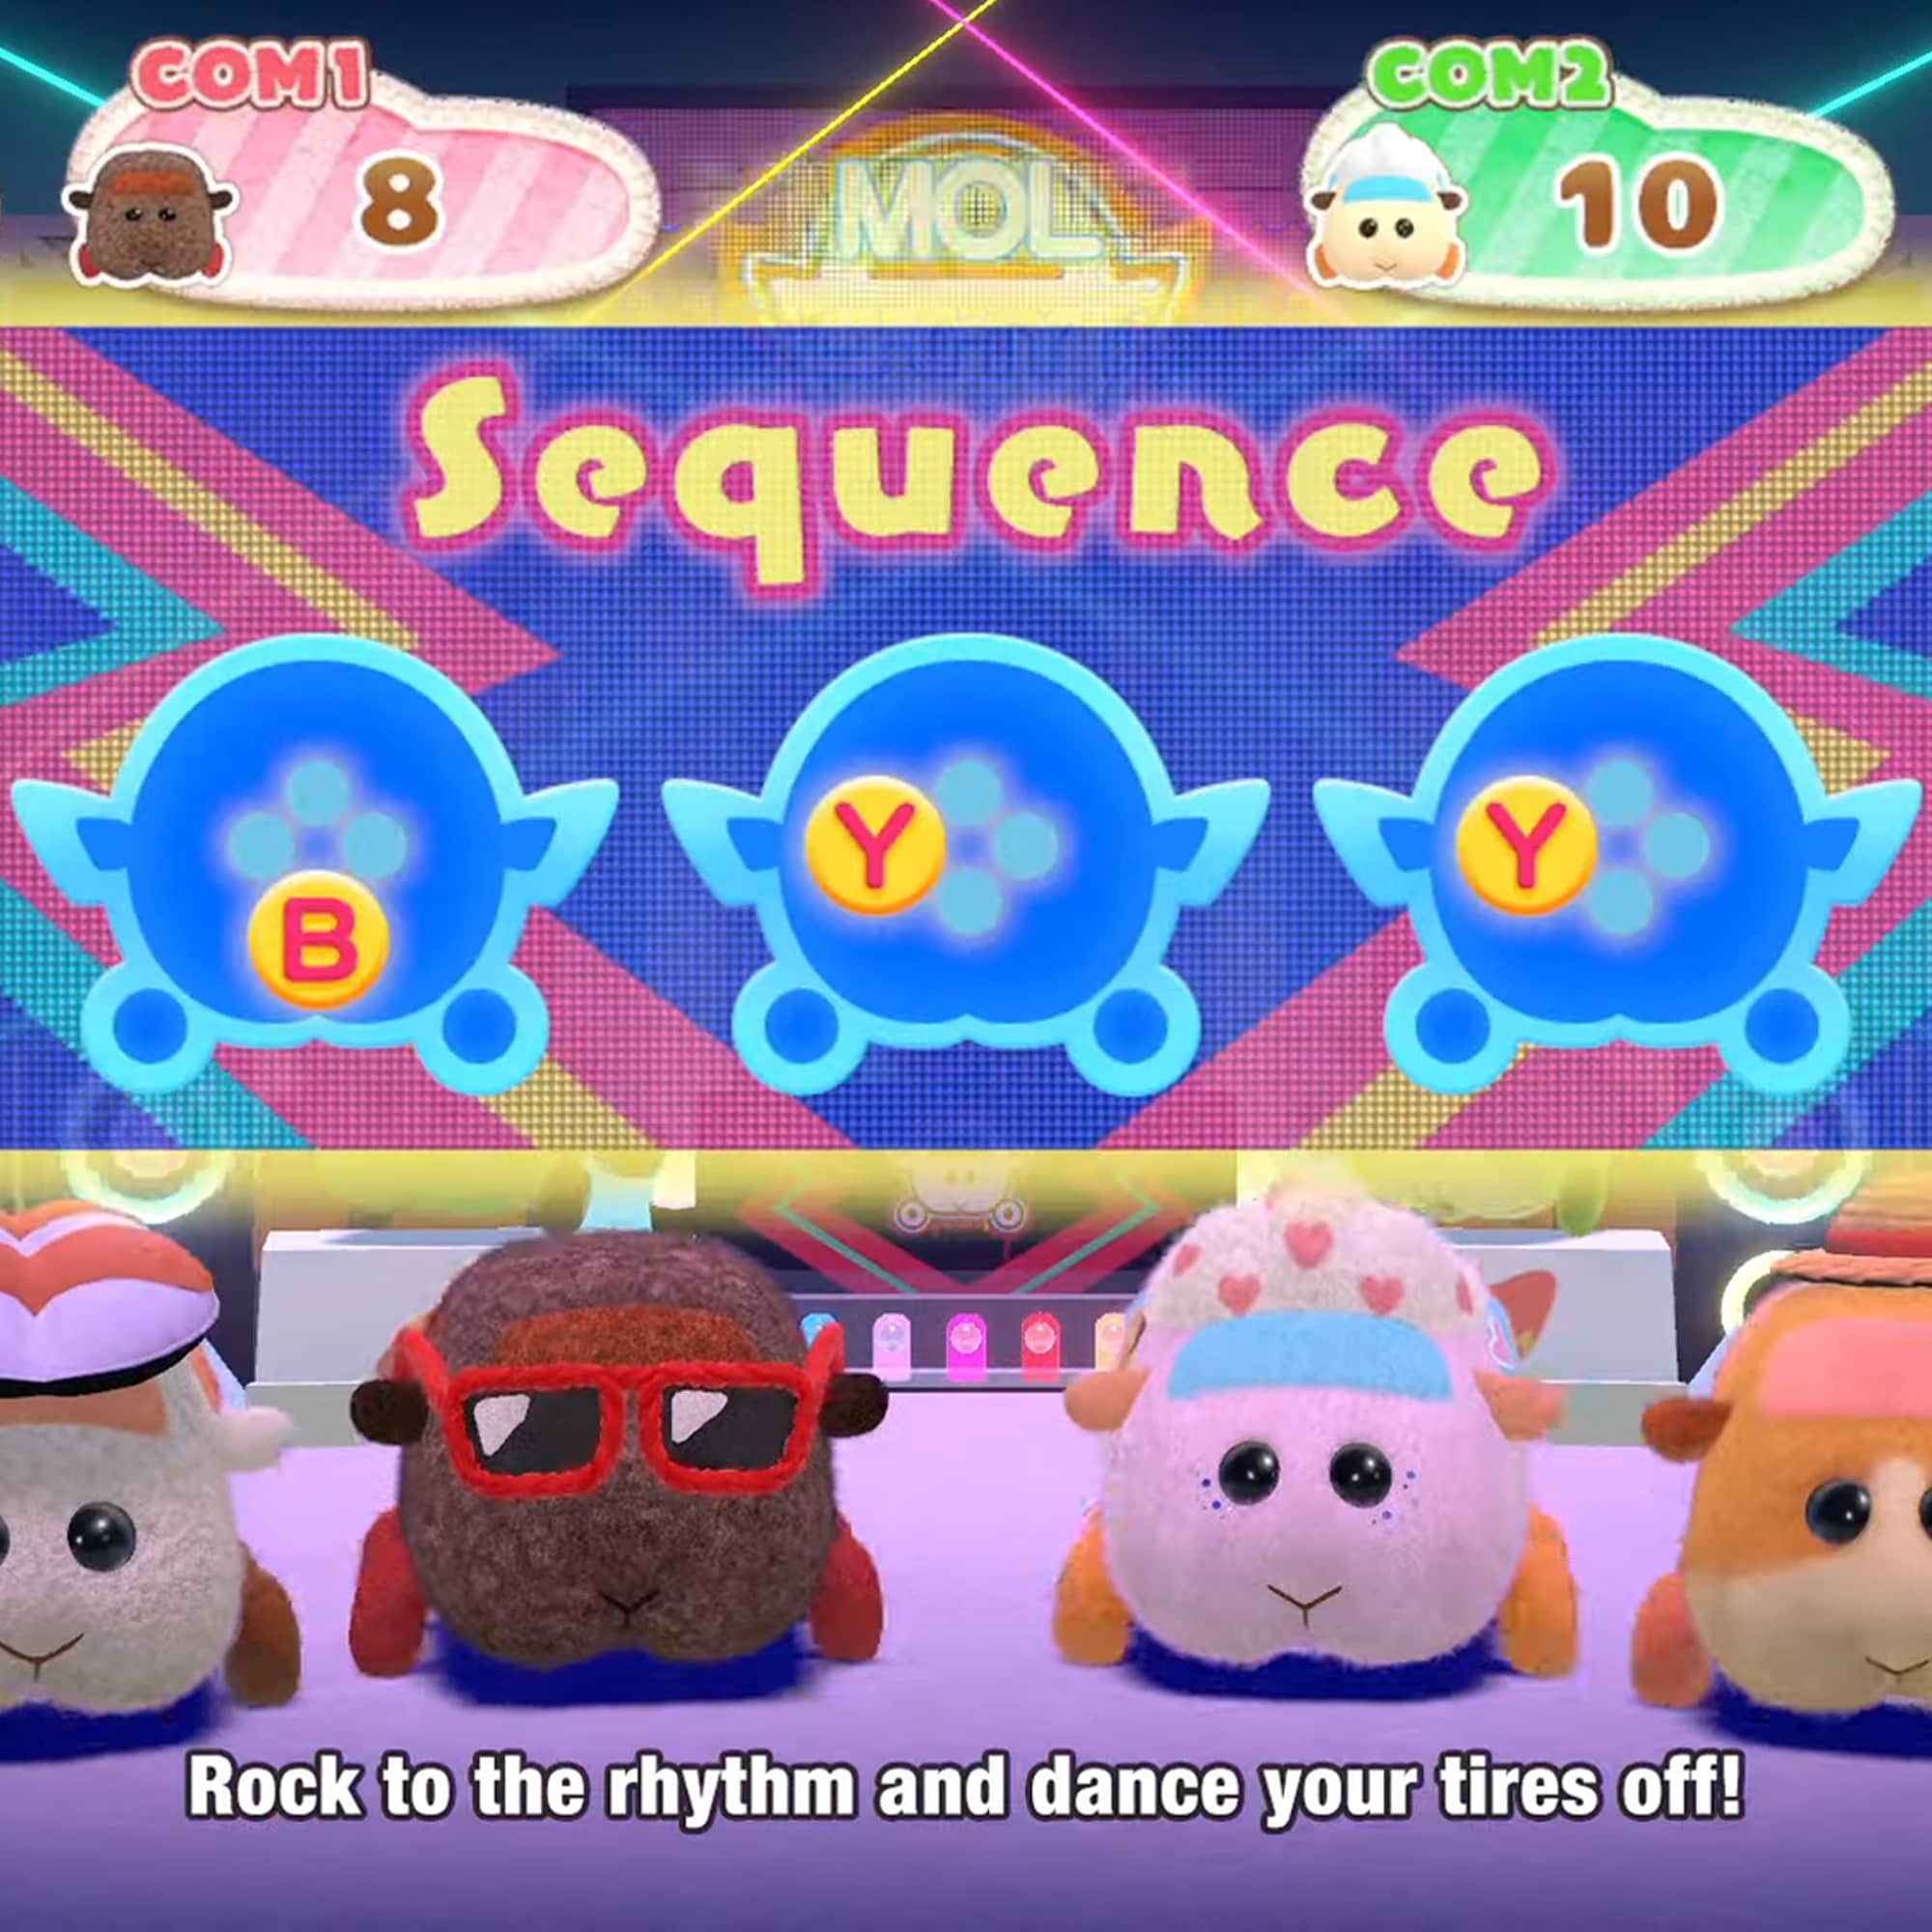 A screenshot from the trailer of the Pui Pui Molcar game, 